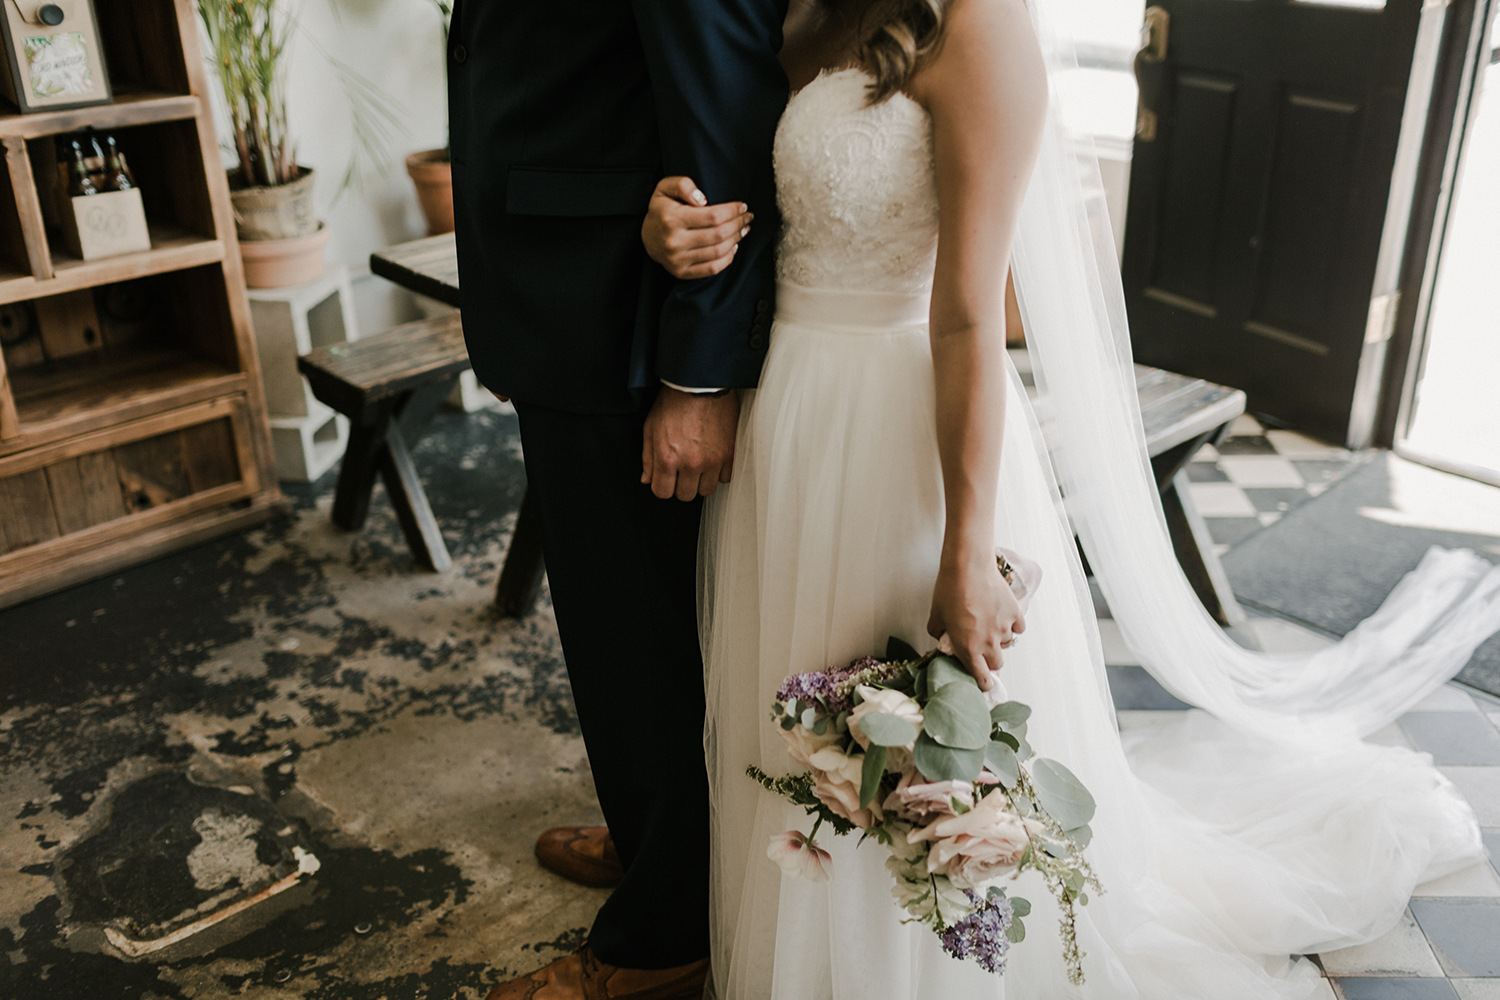 Michelle + Patrick Moody Romantic Wedding // Morgan Hydinger Photography // Lucky Day Events Co. // Ebell Long Beach